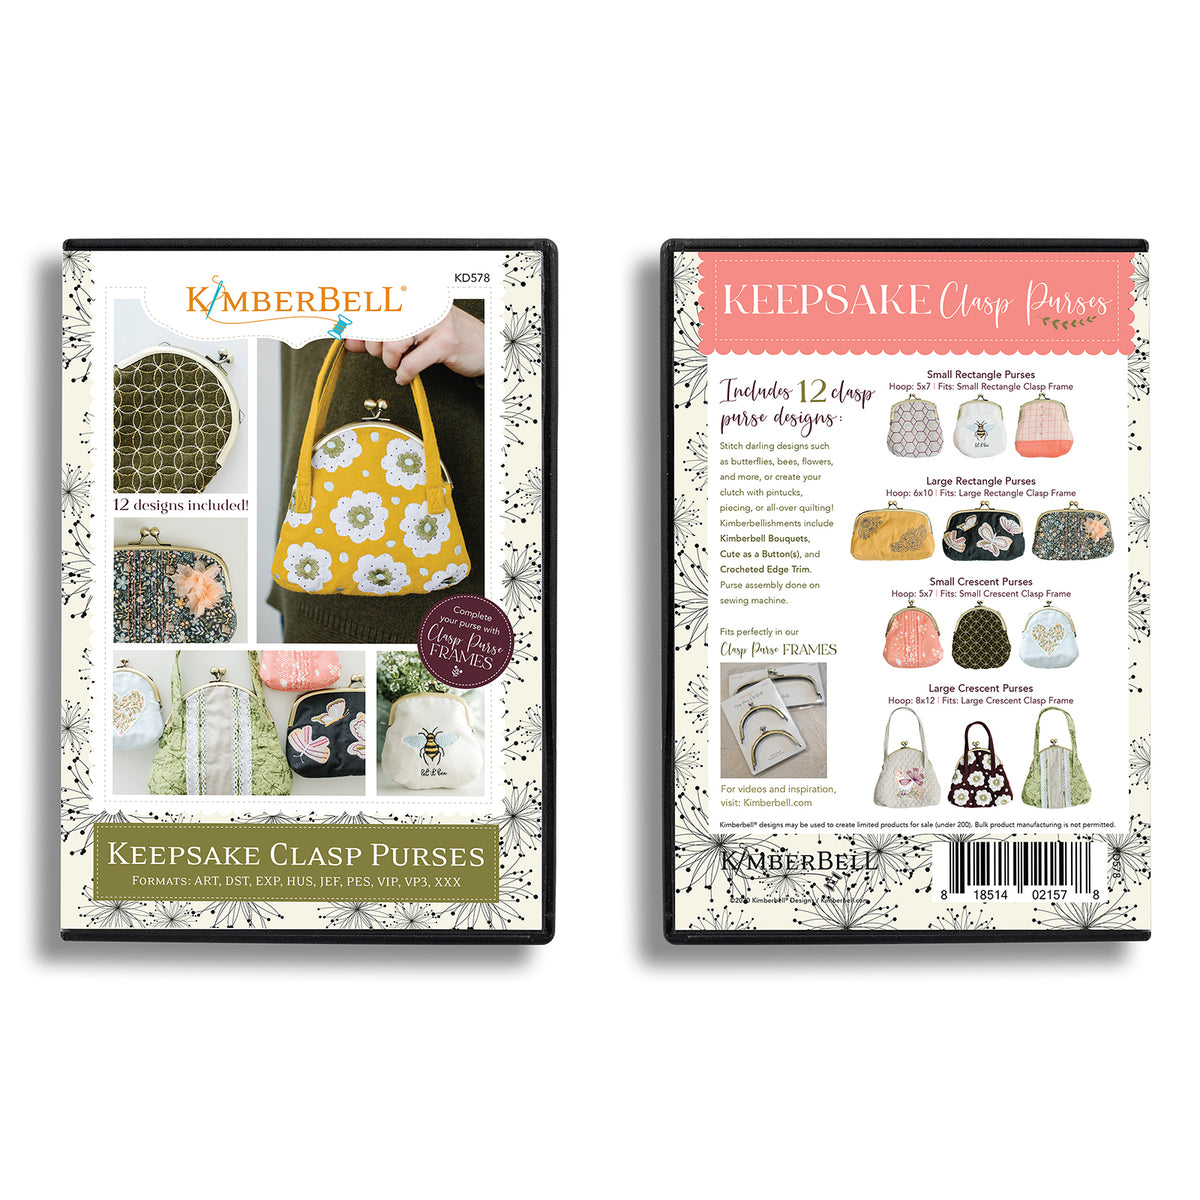 Kimberbell Embellishment Kit Luck O' The Gnome(30 Pcs): Includes Spring Has  Sprung Buttons KDKB186, Applique Glitter, Leather, Pair with Machine